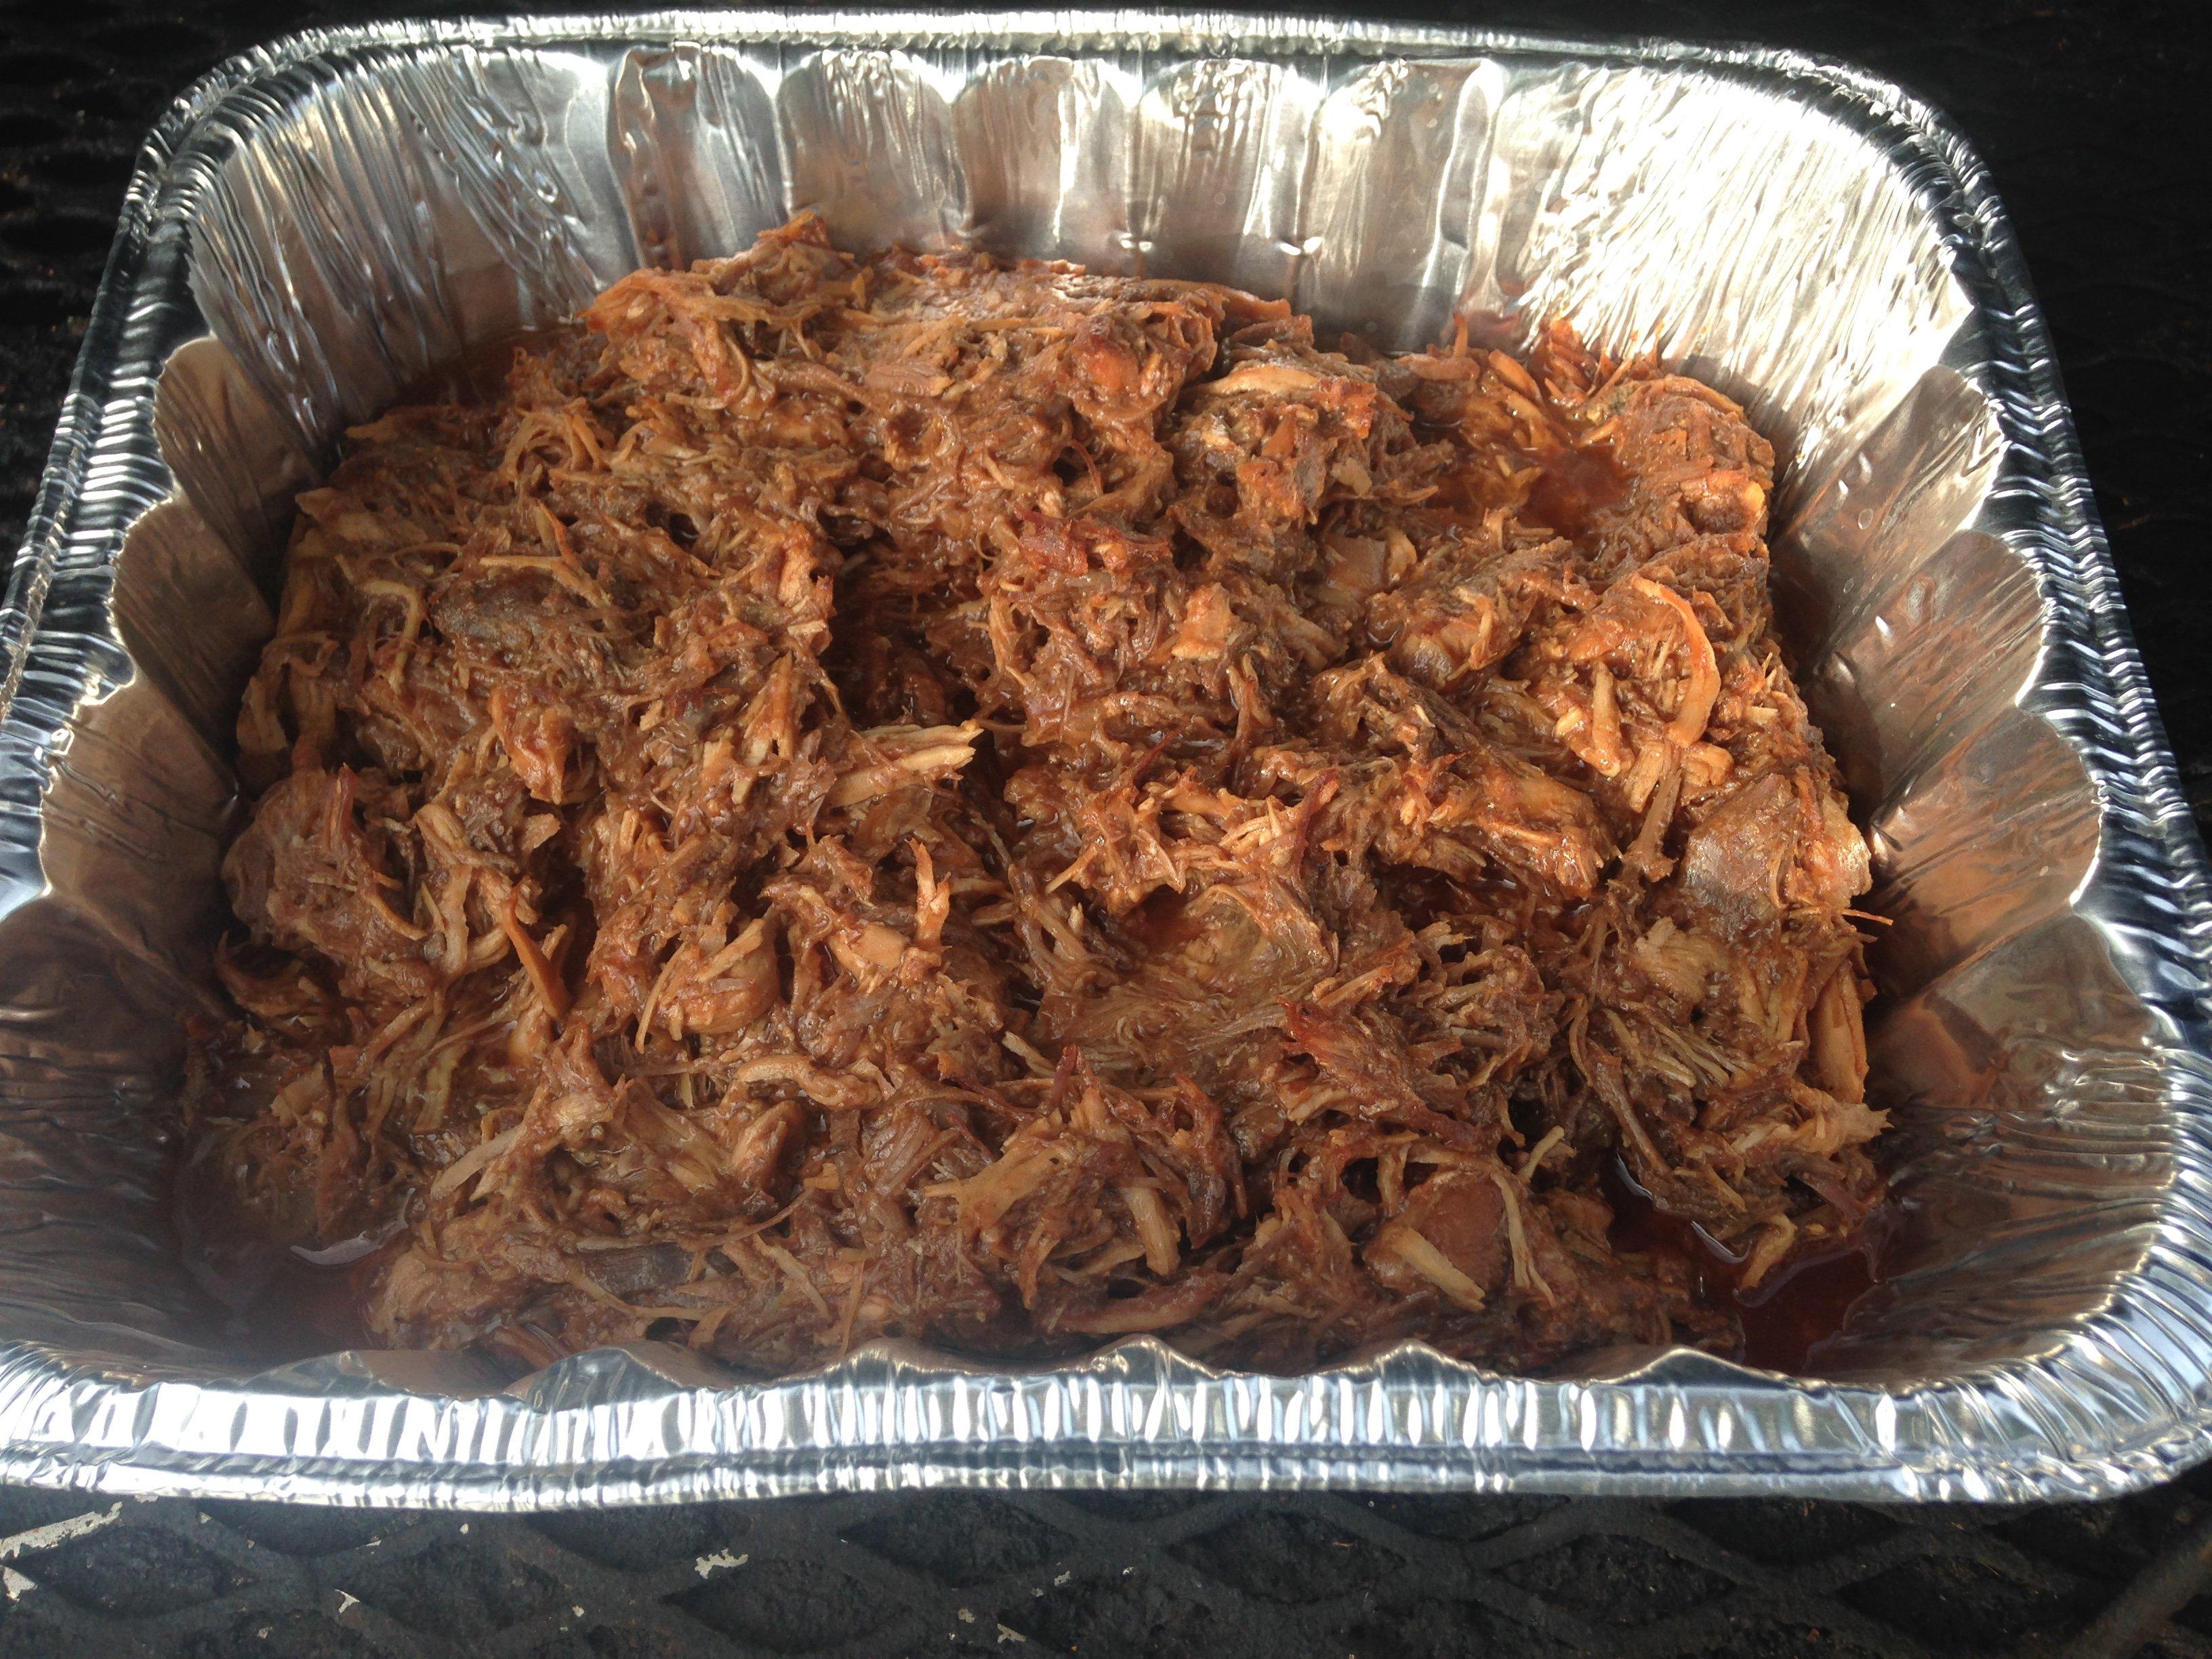 Slow cooked and shredded barbecue turkey is a great way to use up tough legs and thighs.